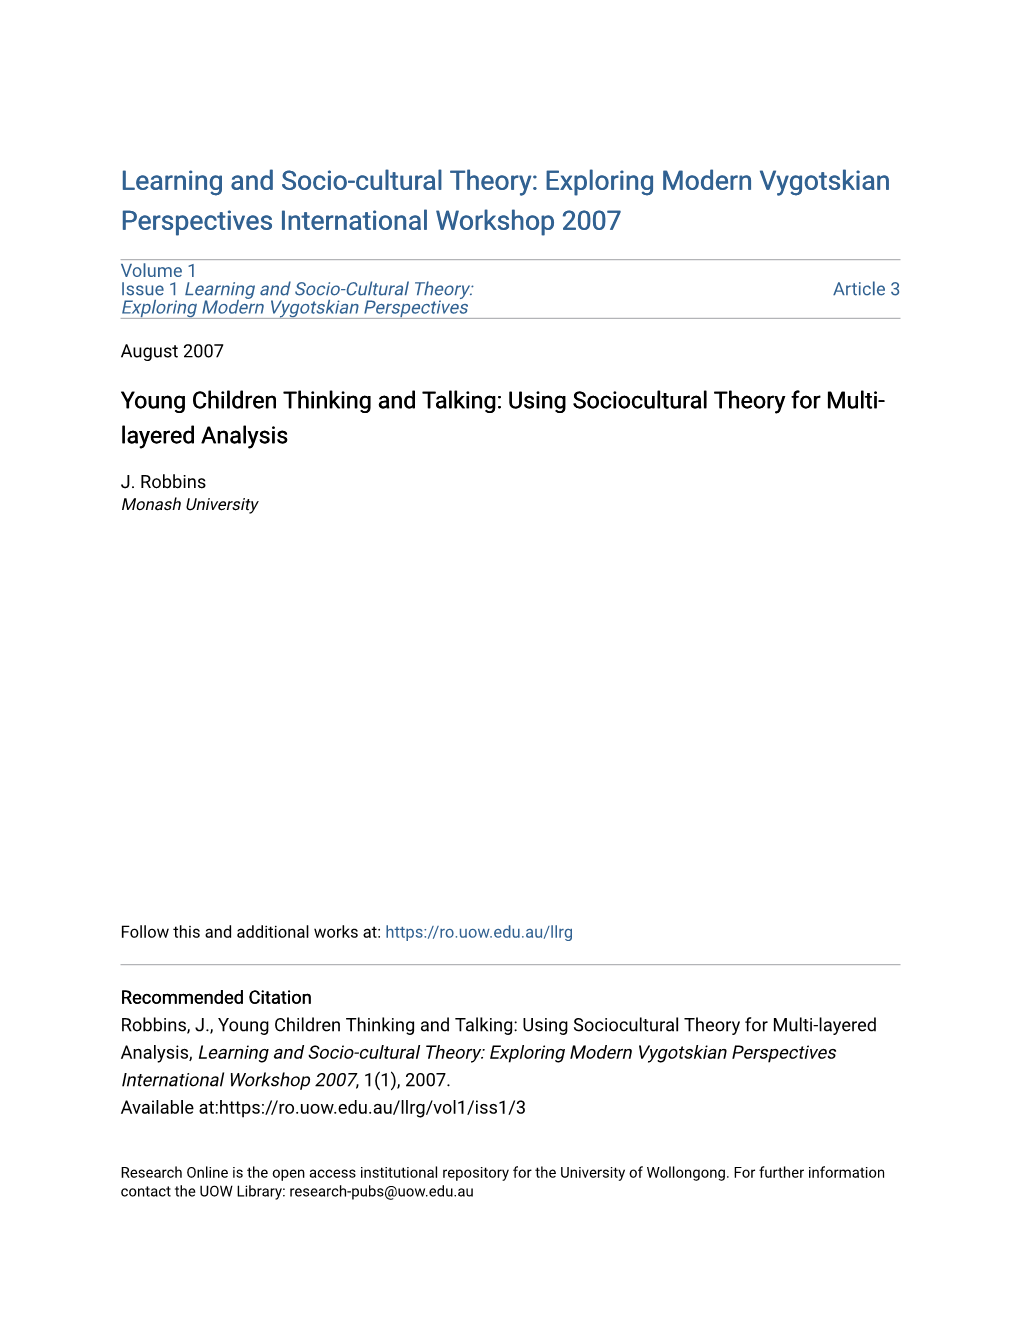 Young Children Thinking and Talking: Using Sociocultural Theory for Multi- Layered Analysis